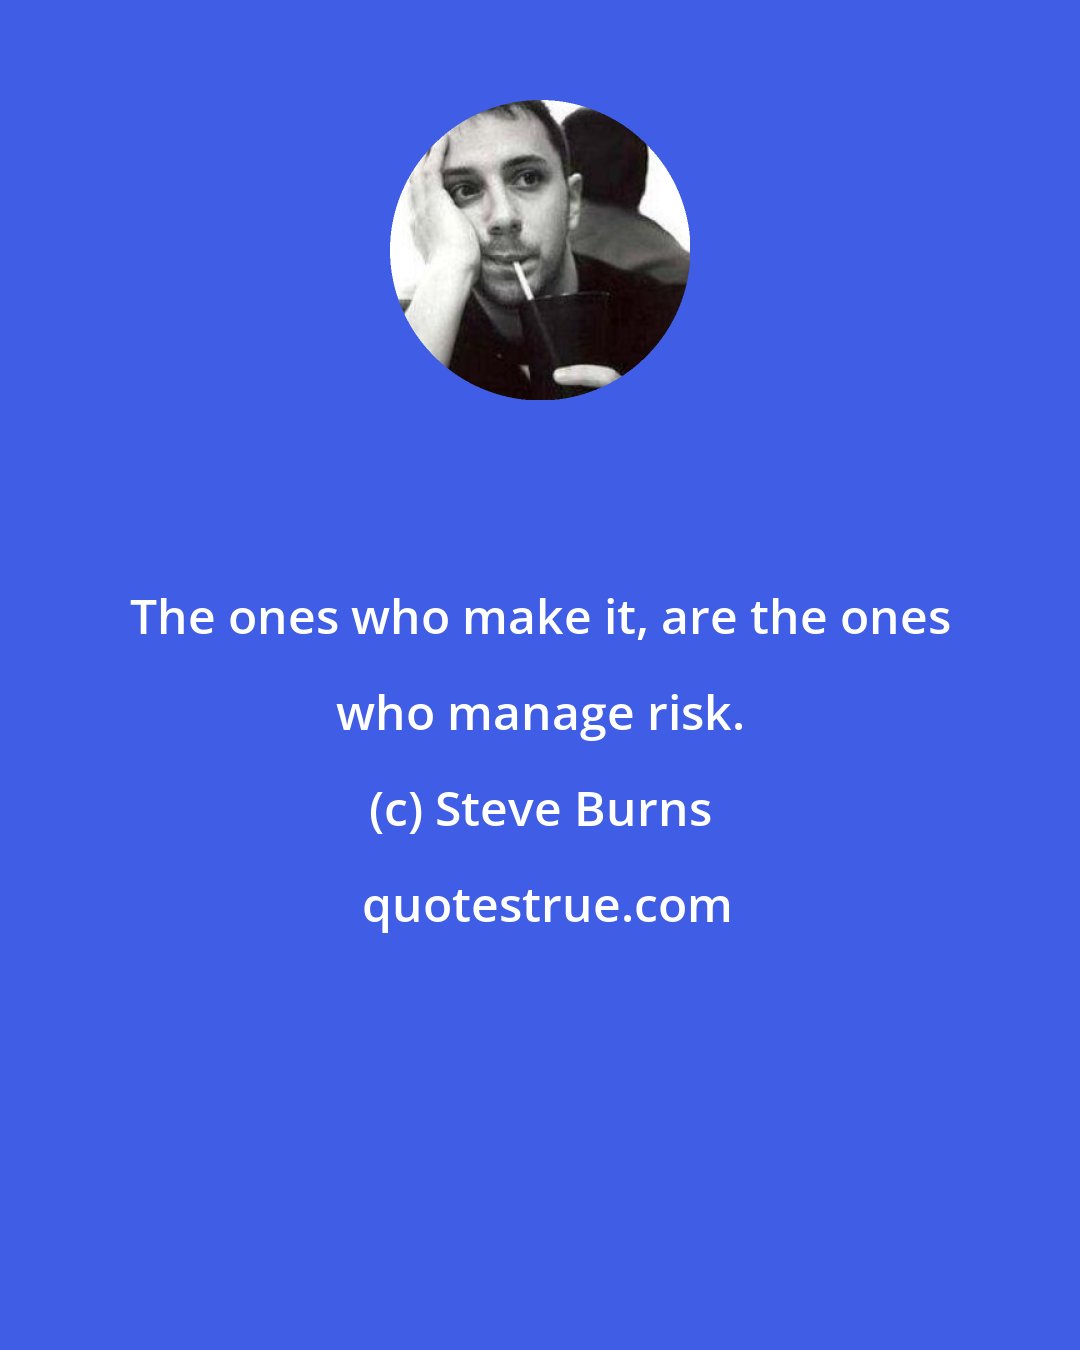 Steve Burns: The ones who make it, are the ones who manage risk.